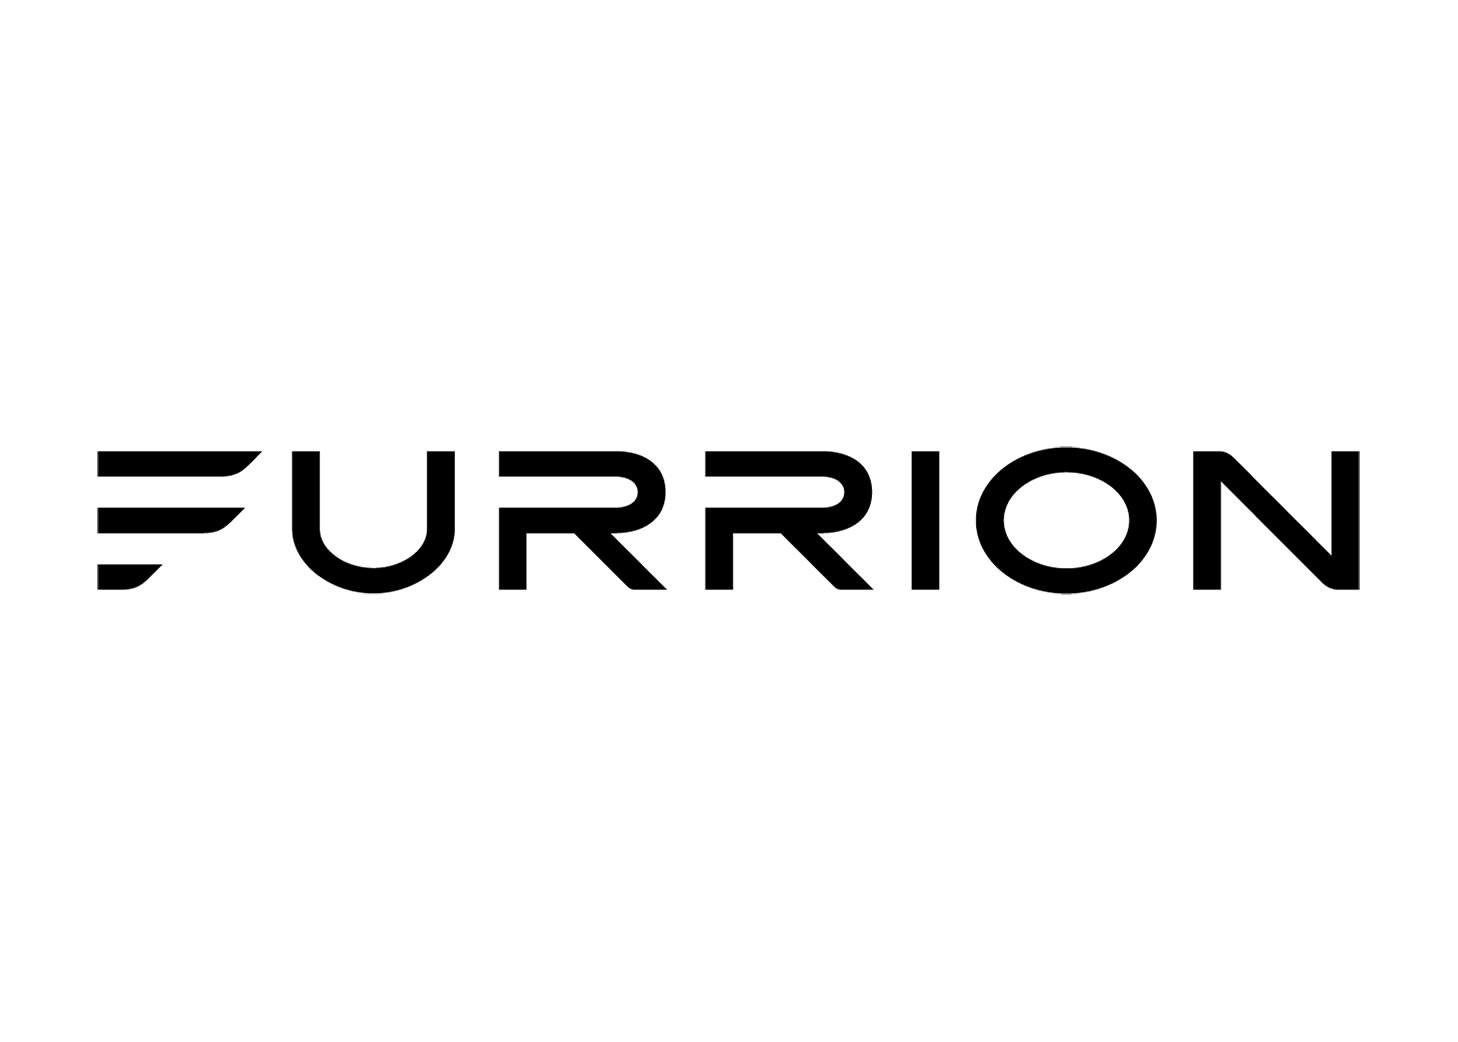 Acquisition of Furrion